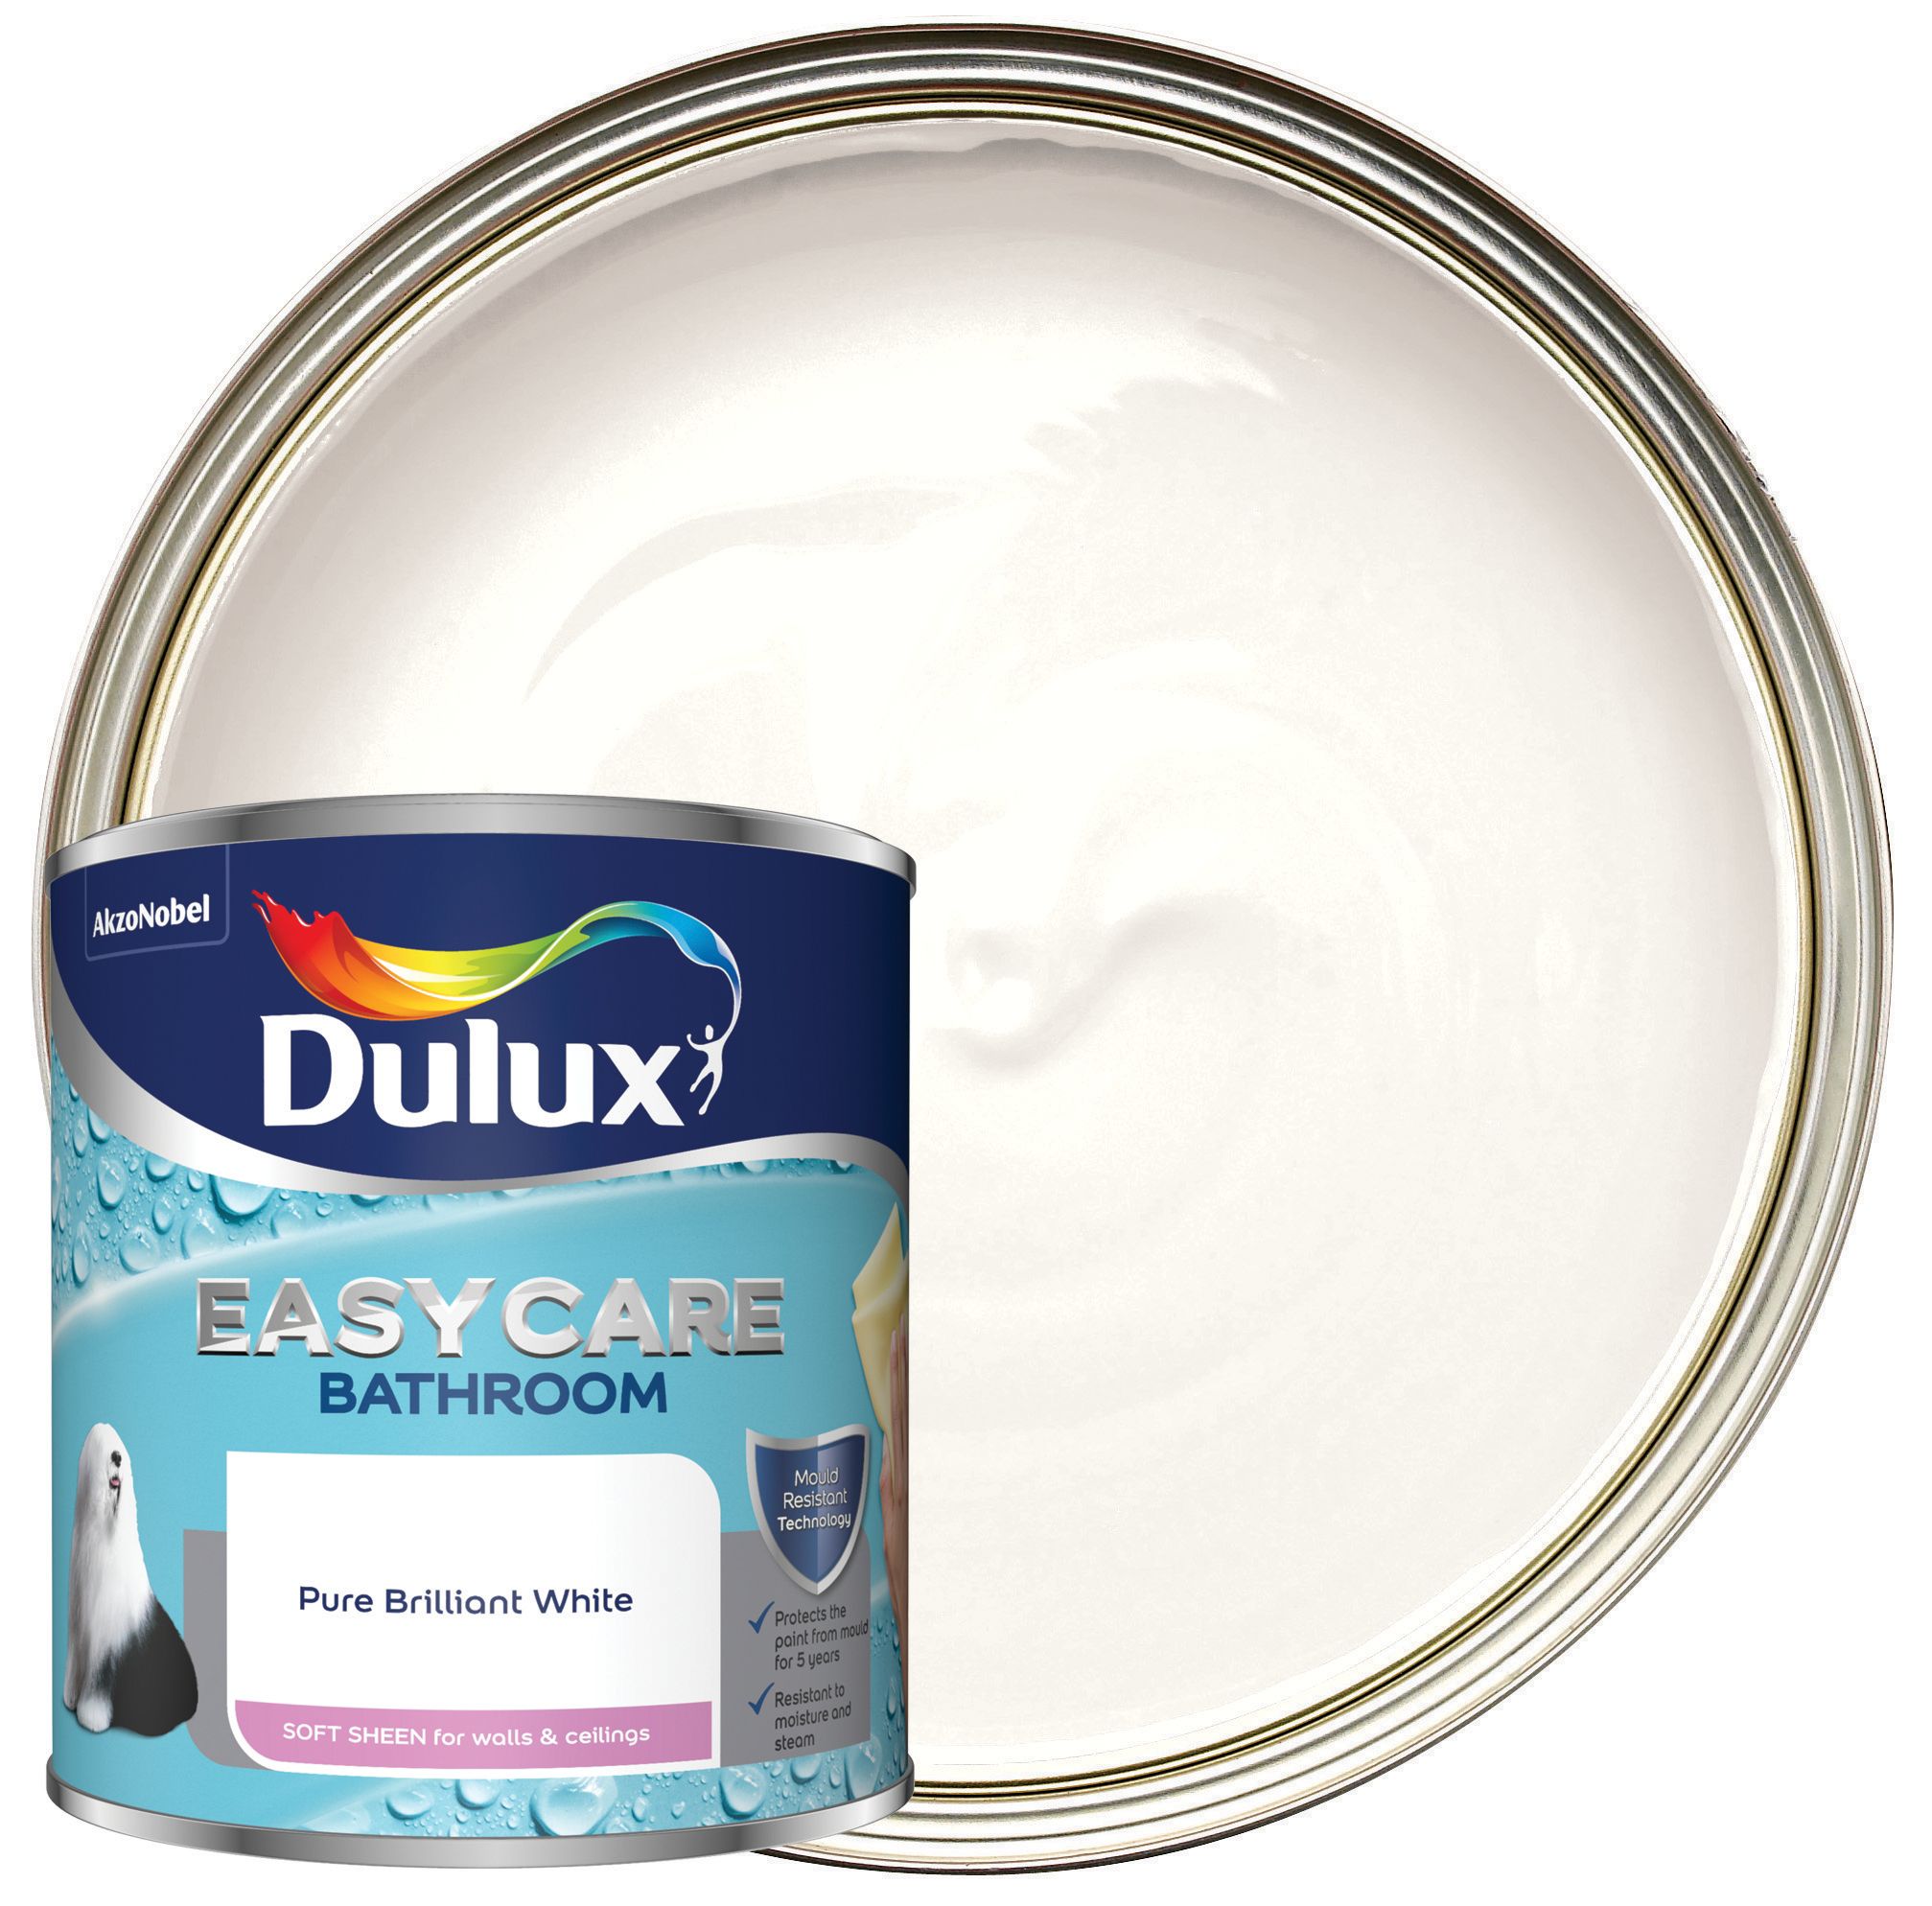 Image of Dulux Real Life Bathroom Paint - Pure Brilliant White - 1L